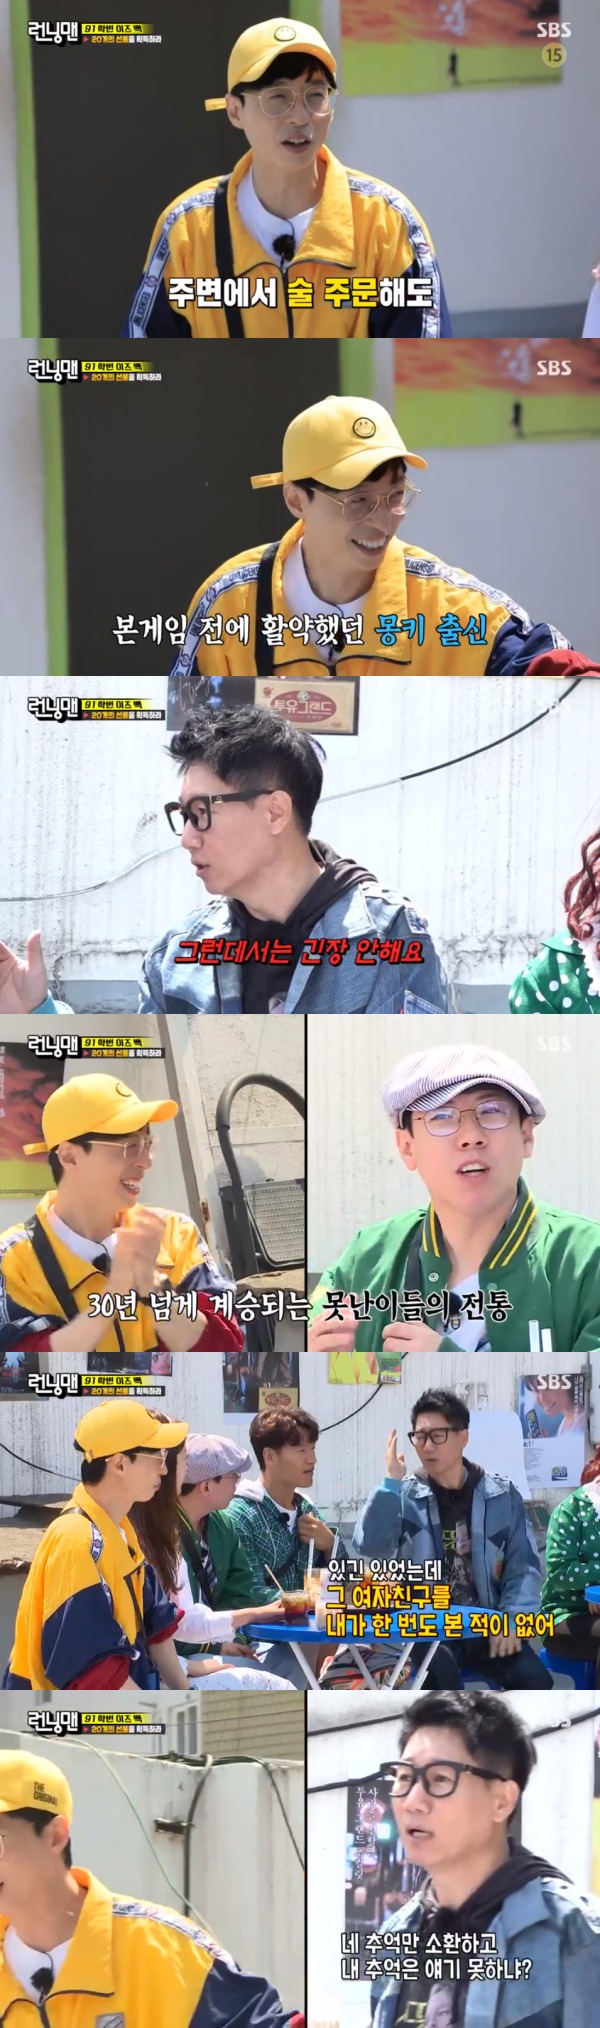 Seoul = = Ji Suk-jin and Yoo Jae-Suk fell into an old story in a place of memories.On SBS Running Man broadcasted on the 2nd, 91th Is Back Race was held.On that day, members of Running Man went to a cafe of memories; Yoo Jae-Suk said, I played a lot with Ji Suk-jin and Kim Yong-man.I ate parpe, cocoa bean in the cafe, recalled memories of the 1990s, when Haha told Yoo Jae-Suk, who had not even drunk and had only Cocoa bean.Im at home. Yoo Jae-Suk said, I came out to play. I came out to eat parpe. Kim Jong Kook asked, Are you expecting romance?Of course, its decorating and coming out, Yoo Jae-Suk replied, and laughed glumly, Ive never been hit by a hunting.Ji Suk-jin said, Yoo Jae-Suk was a windbreaker. It was a monkey style.In private, such a funny kid did a tension in front of Camera, said Yoo Jae-Suk, its not so dark in front of the person you like.Ji Suk-jin reveals that he saw Yoo Jae-Suk break up with girlfriend and weep.Yoo Jae-Suk then responded, Ji Suk-jin also cried in front of me.